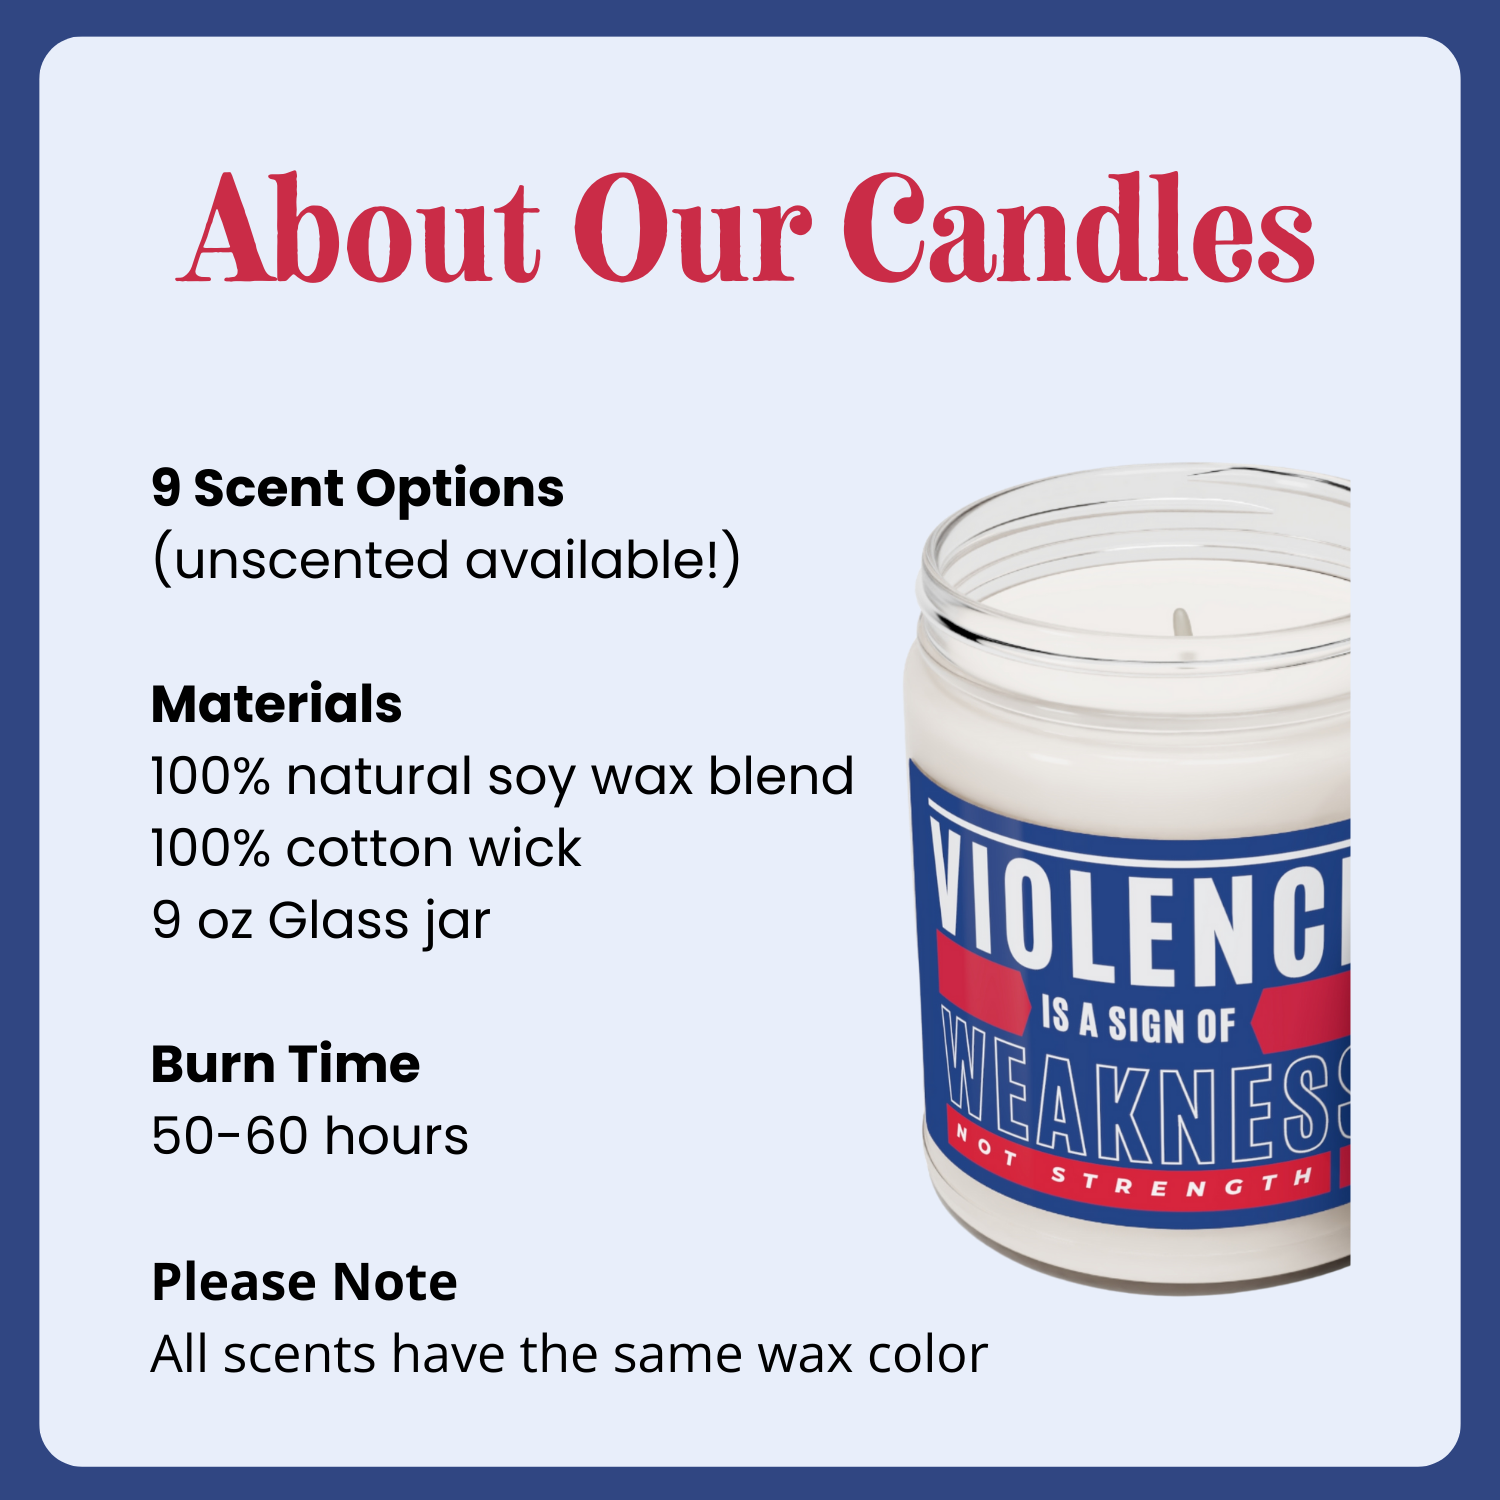 Candle: nine scents plus a fragrance-free option, 100% natural soy wax blend, 50-60 hours burn time, all scents have the same wax color. 